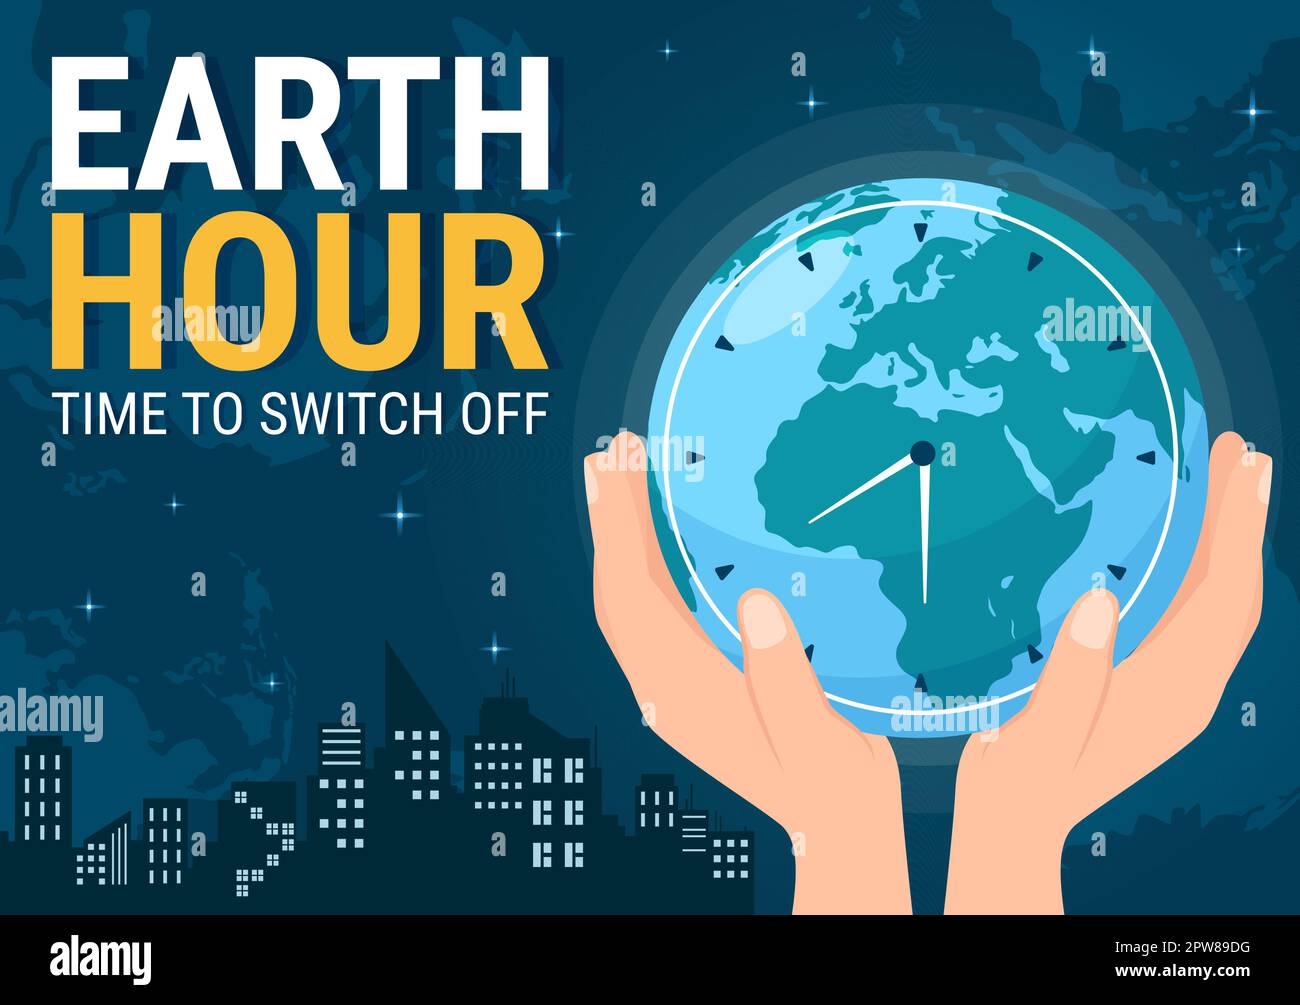 Happy Earth Hour Day Illustration with Lightbulb, World Map and Time to Turn Off in Flat Sleep Cartoon Hand Drawn Landing Page Templates Stock Vector